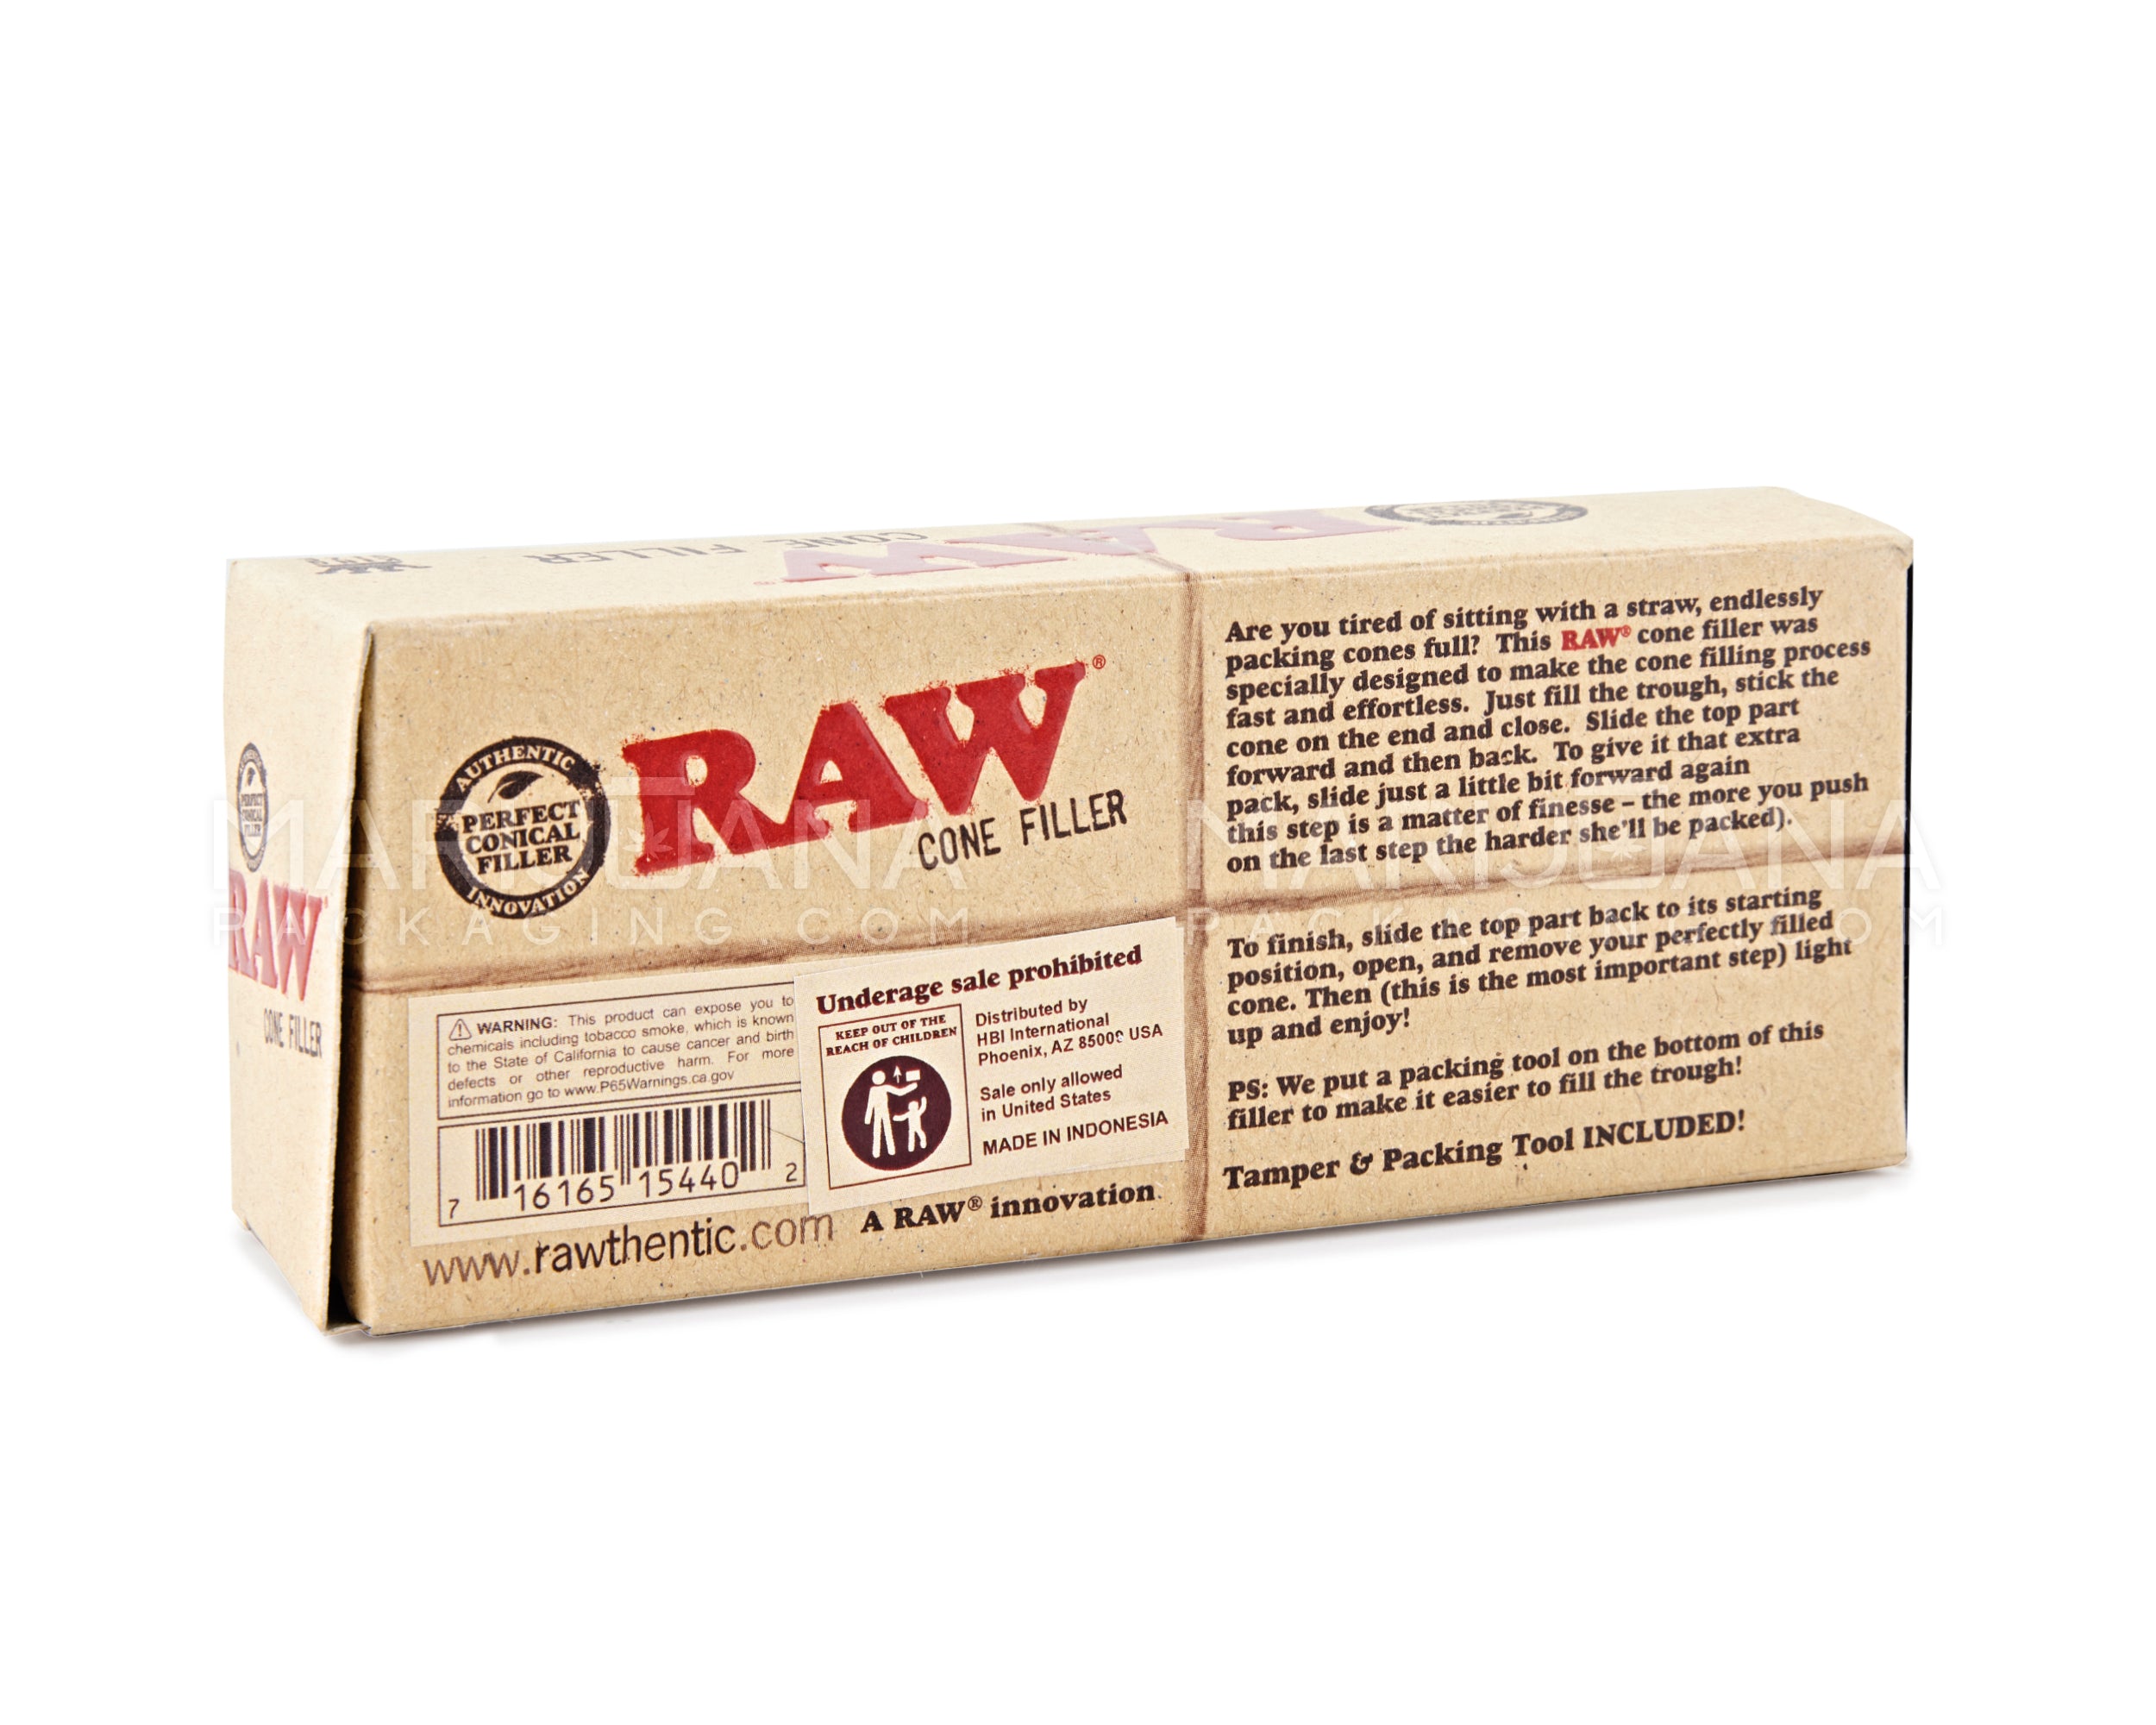 RAW | King Size 109mm Manual Single Cone Filling Device